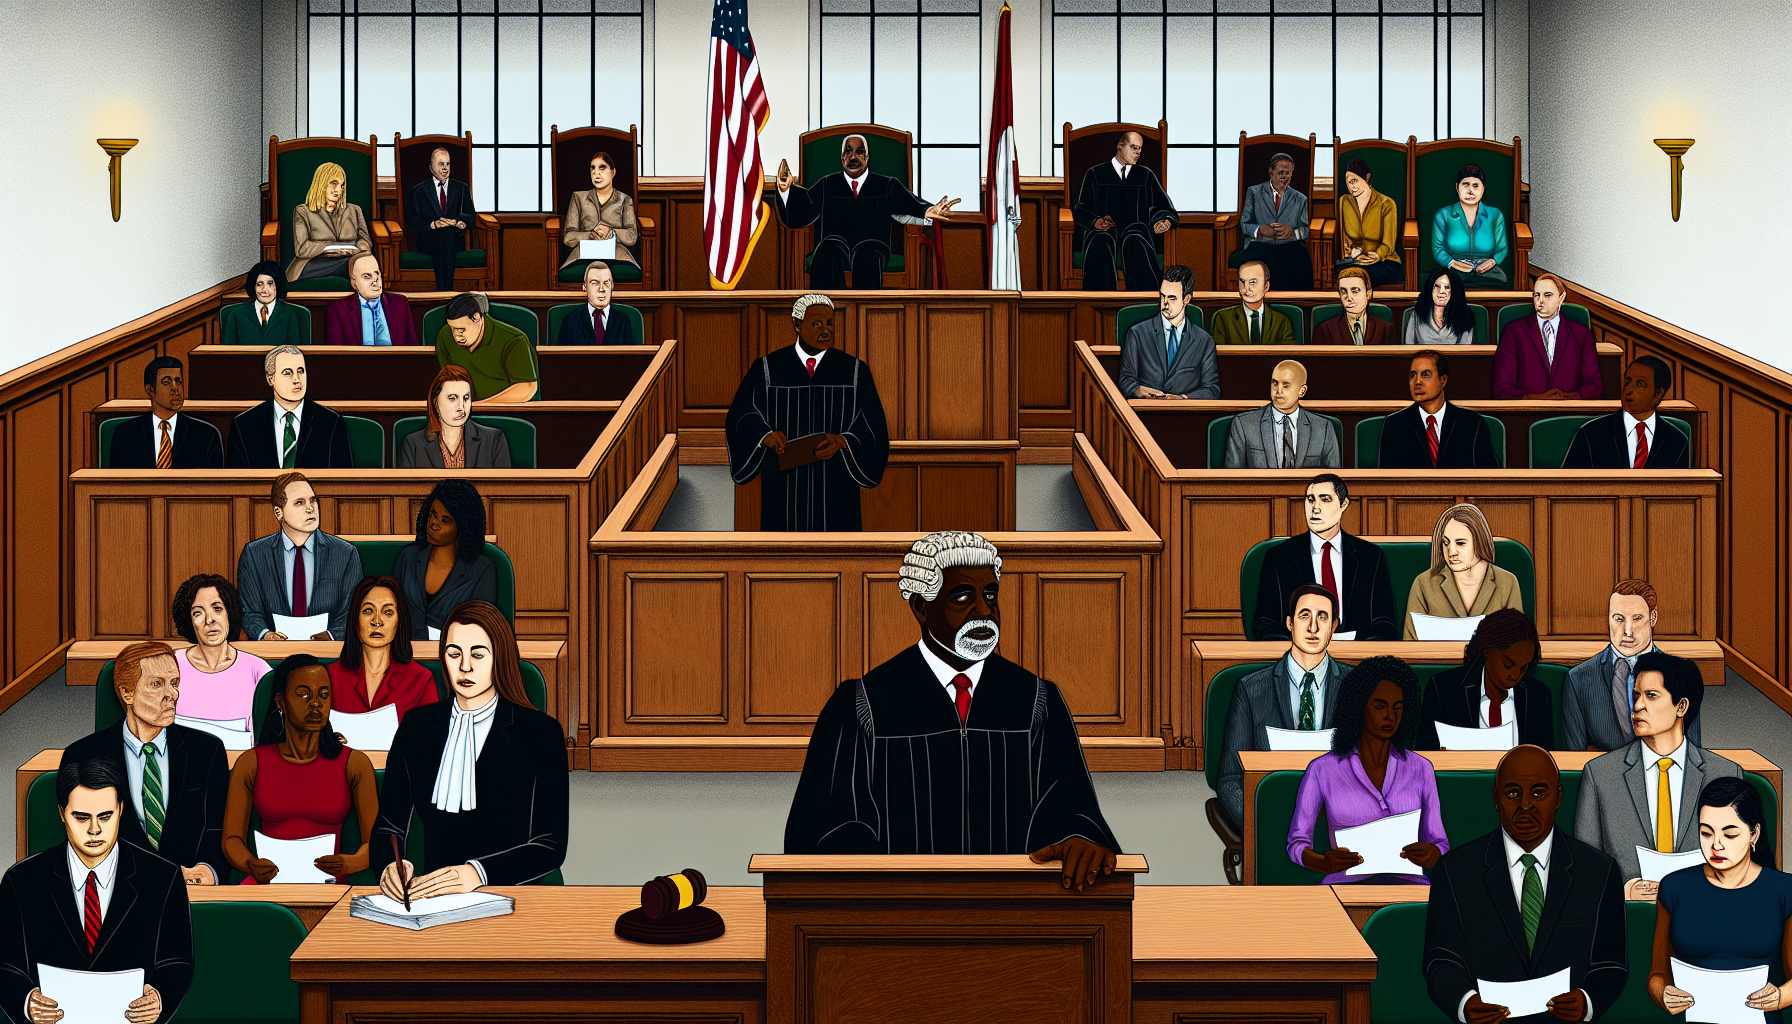 A photo of a courtroom with a judge and lawyers to represent the legal aspect of personal injury law.